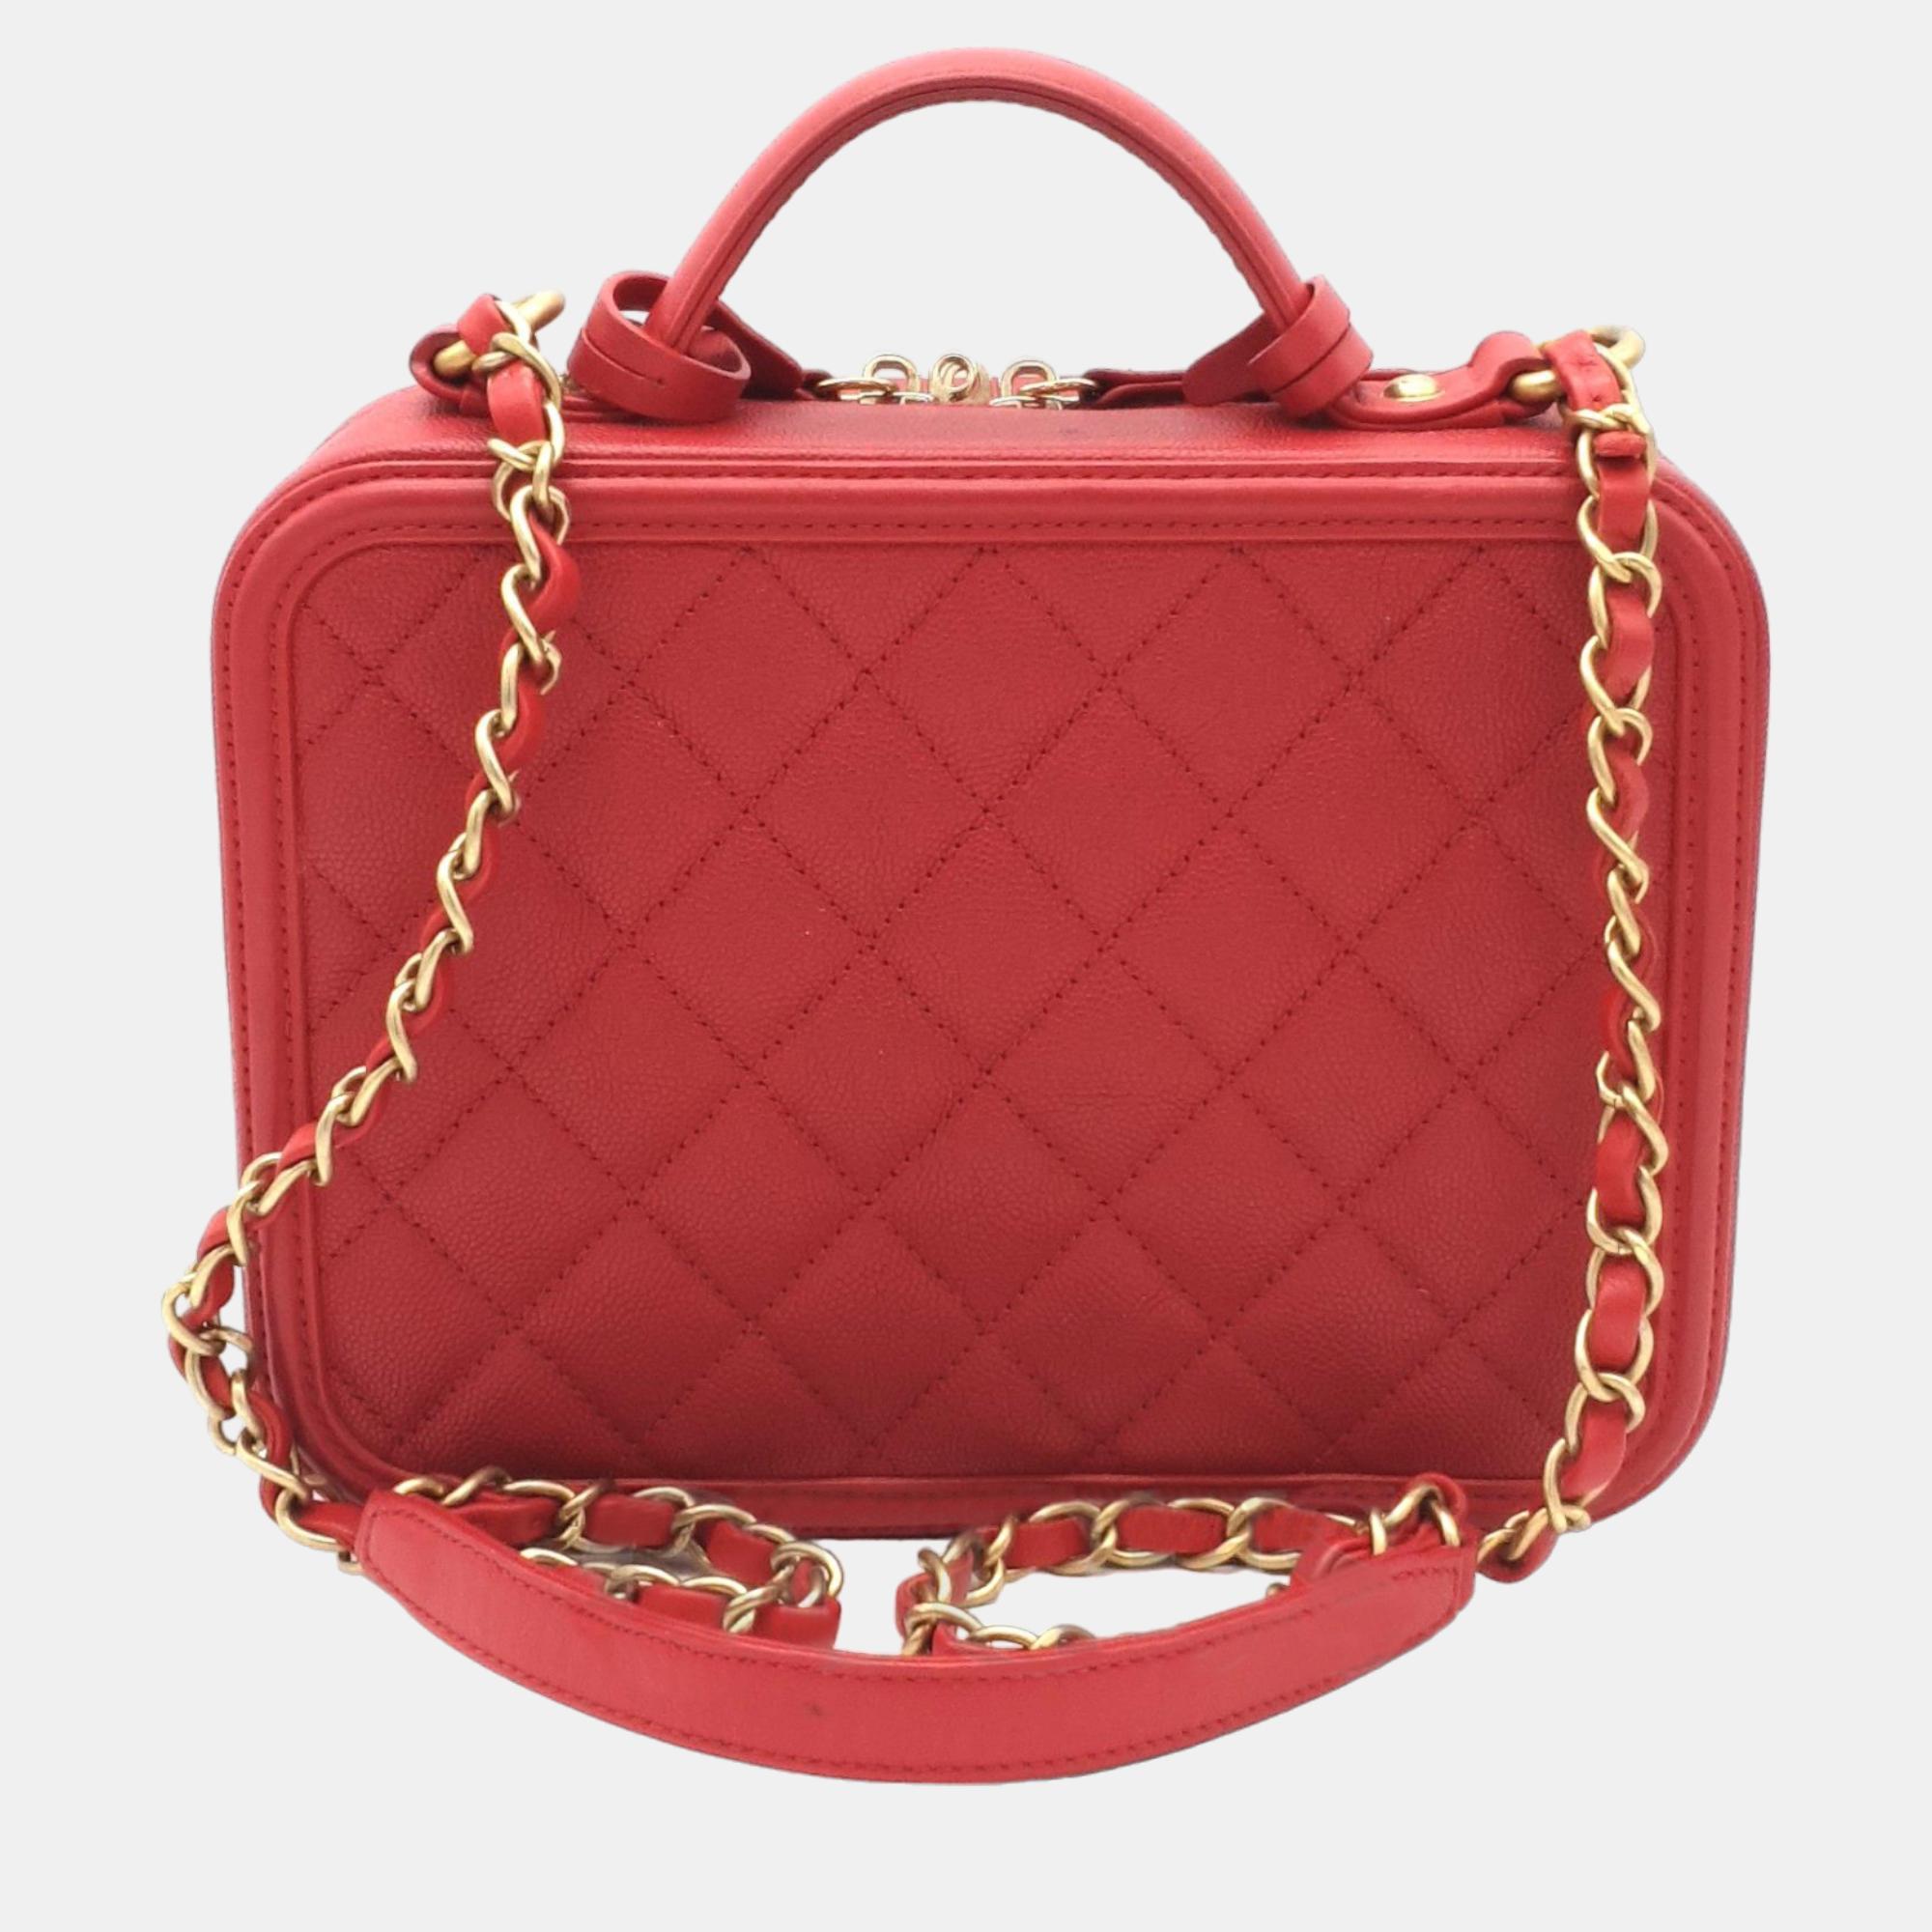 Chanel Red Leather CC Vanity Case